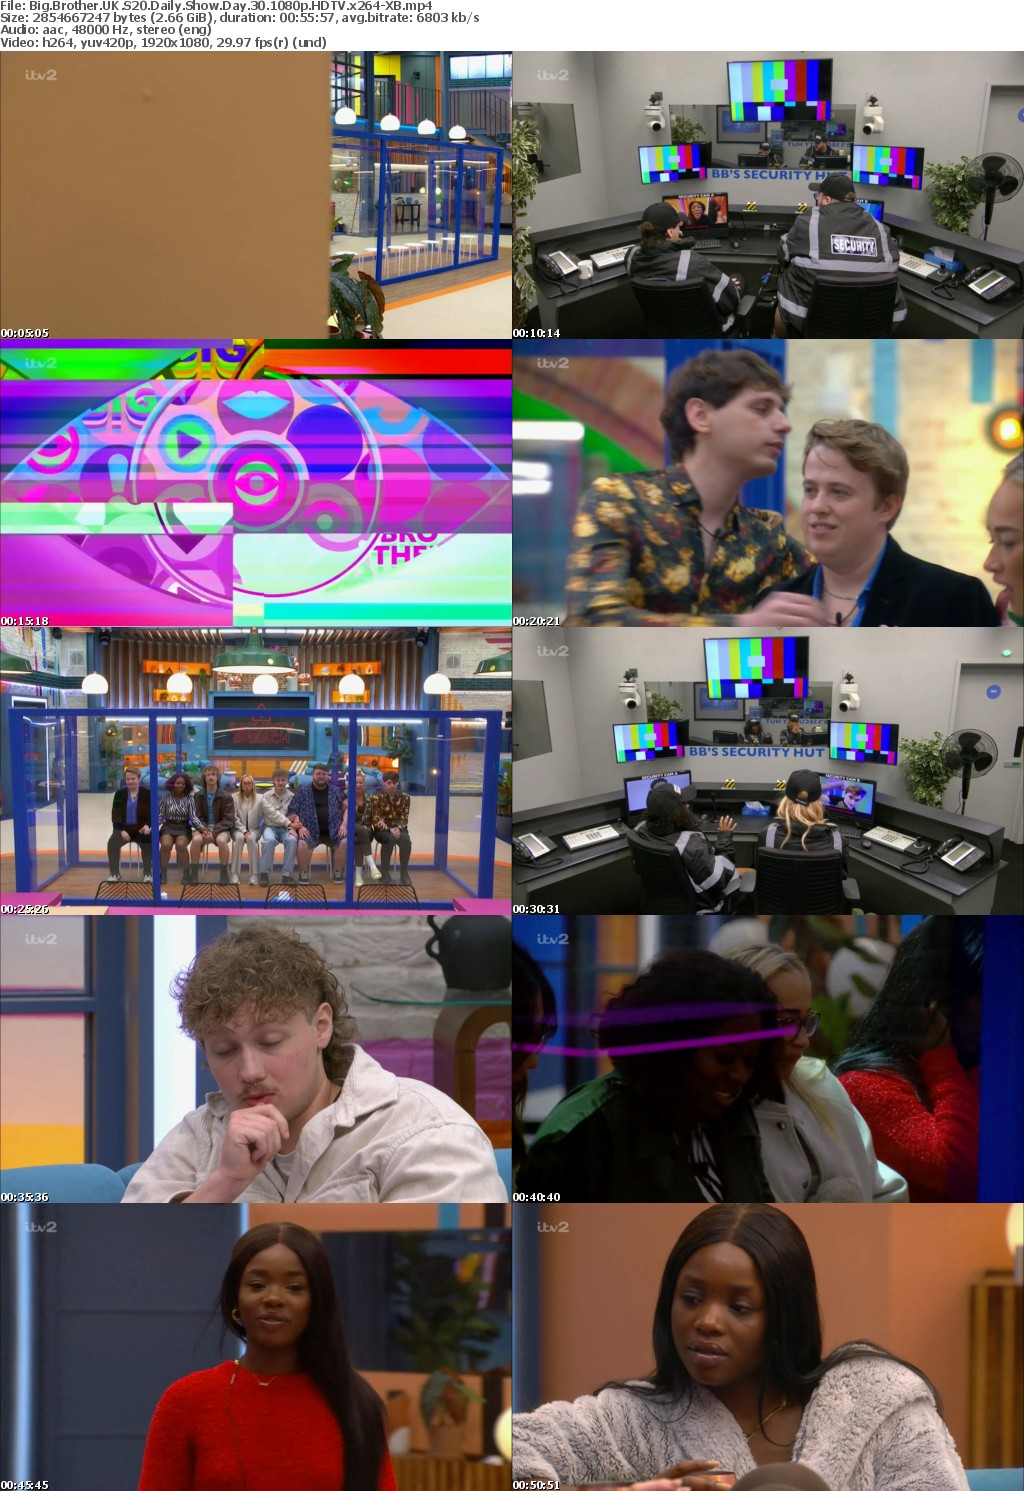 Big Brother UK S20 Daily Show Day 30 1080p HDTV x264-XB